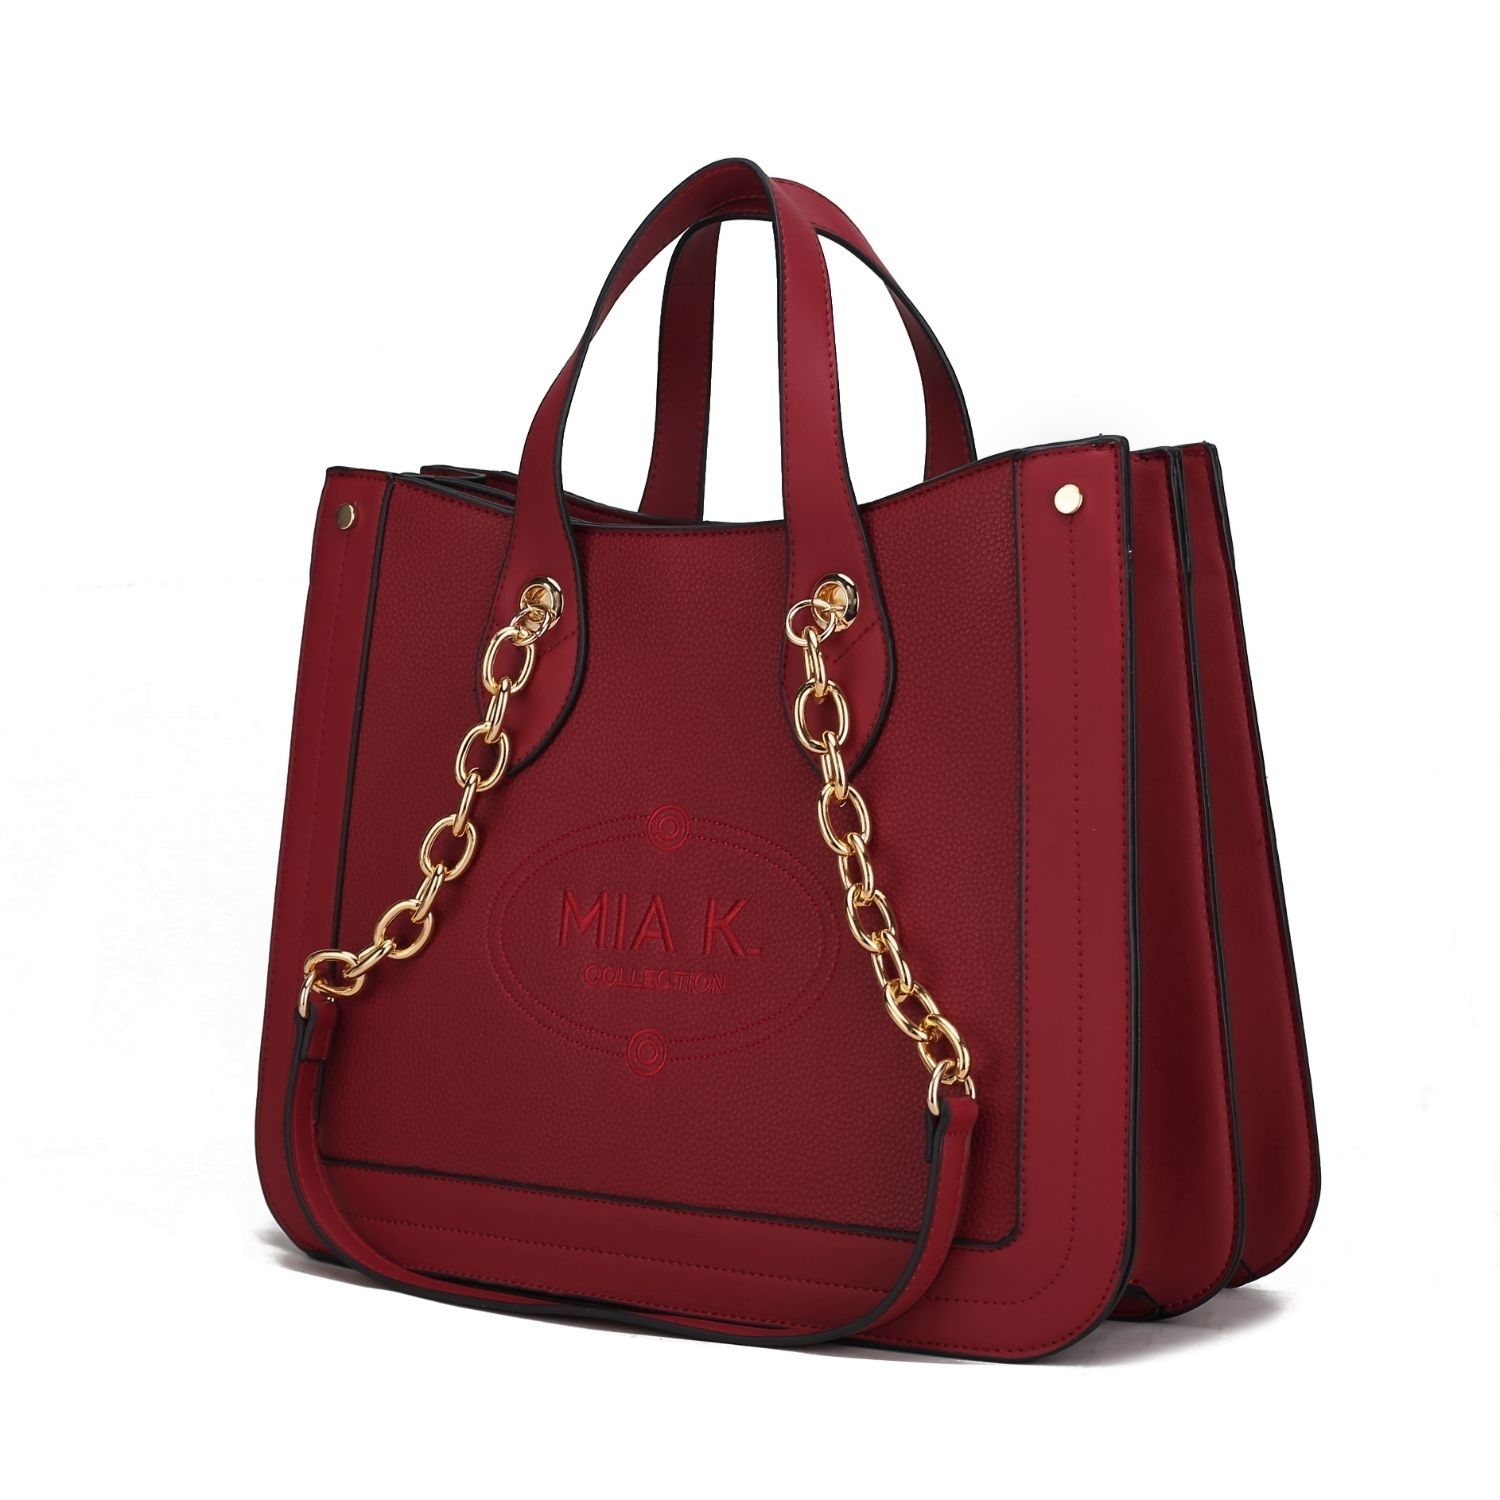 MKF Collection Stella Vegan Leather Women's Handbag Double Compartment Oversize Classy Tote By Mia K. - Red